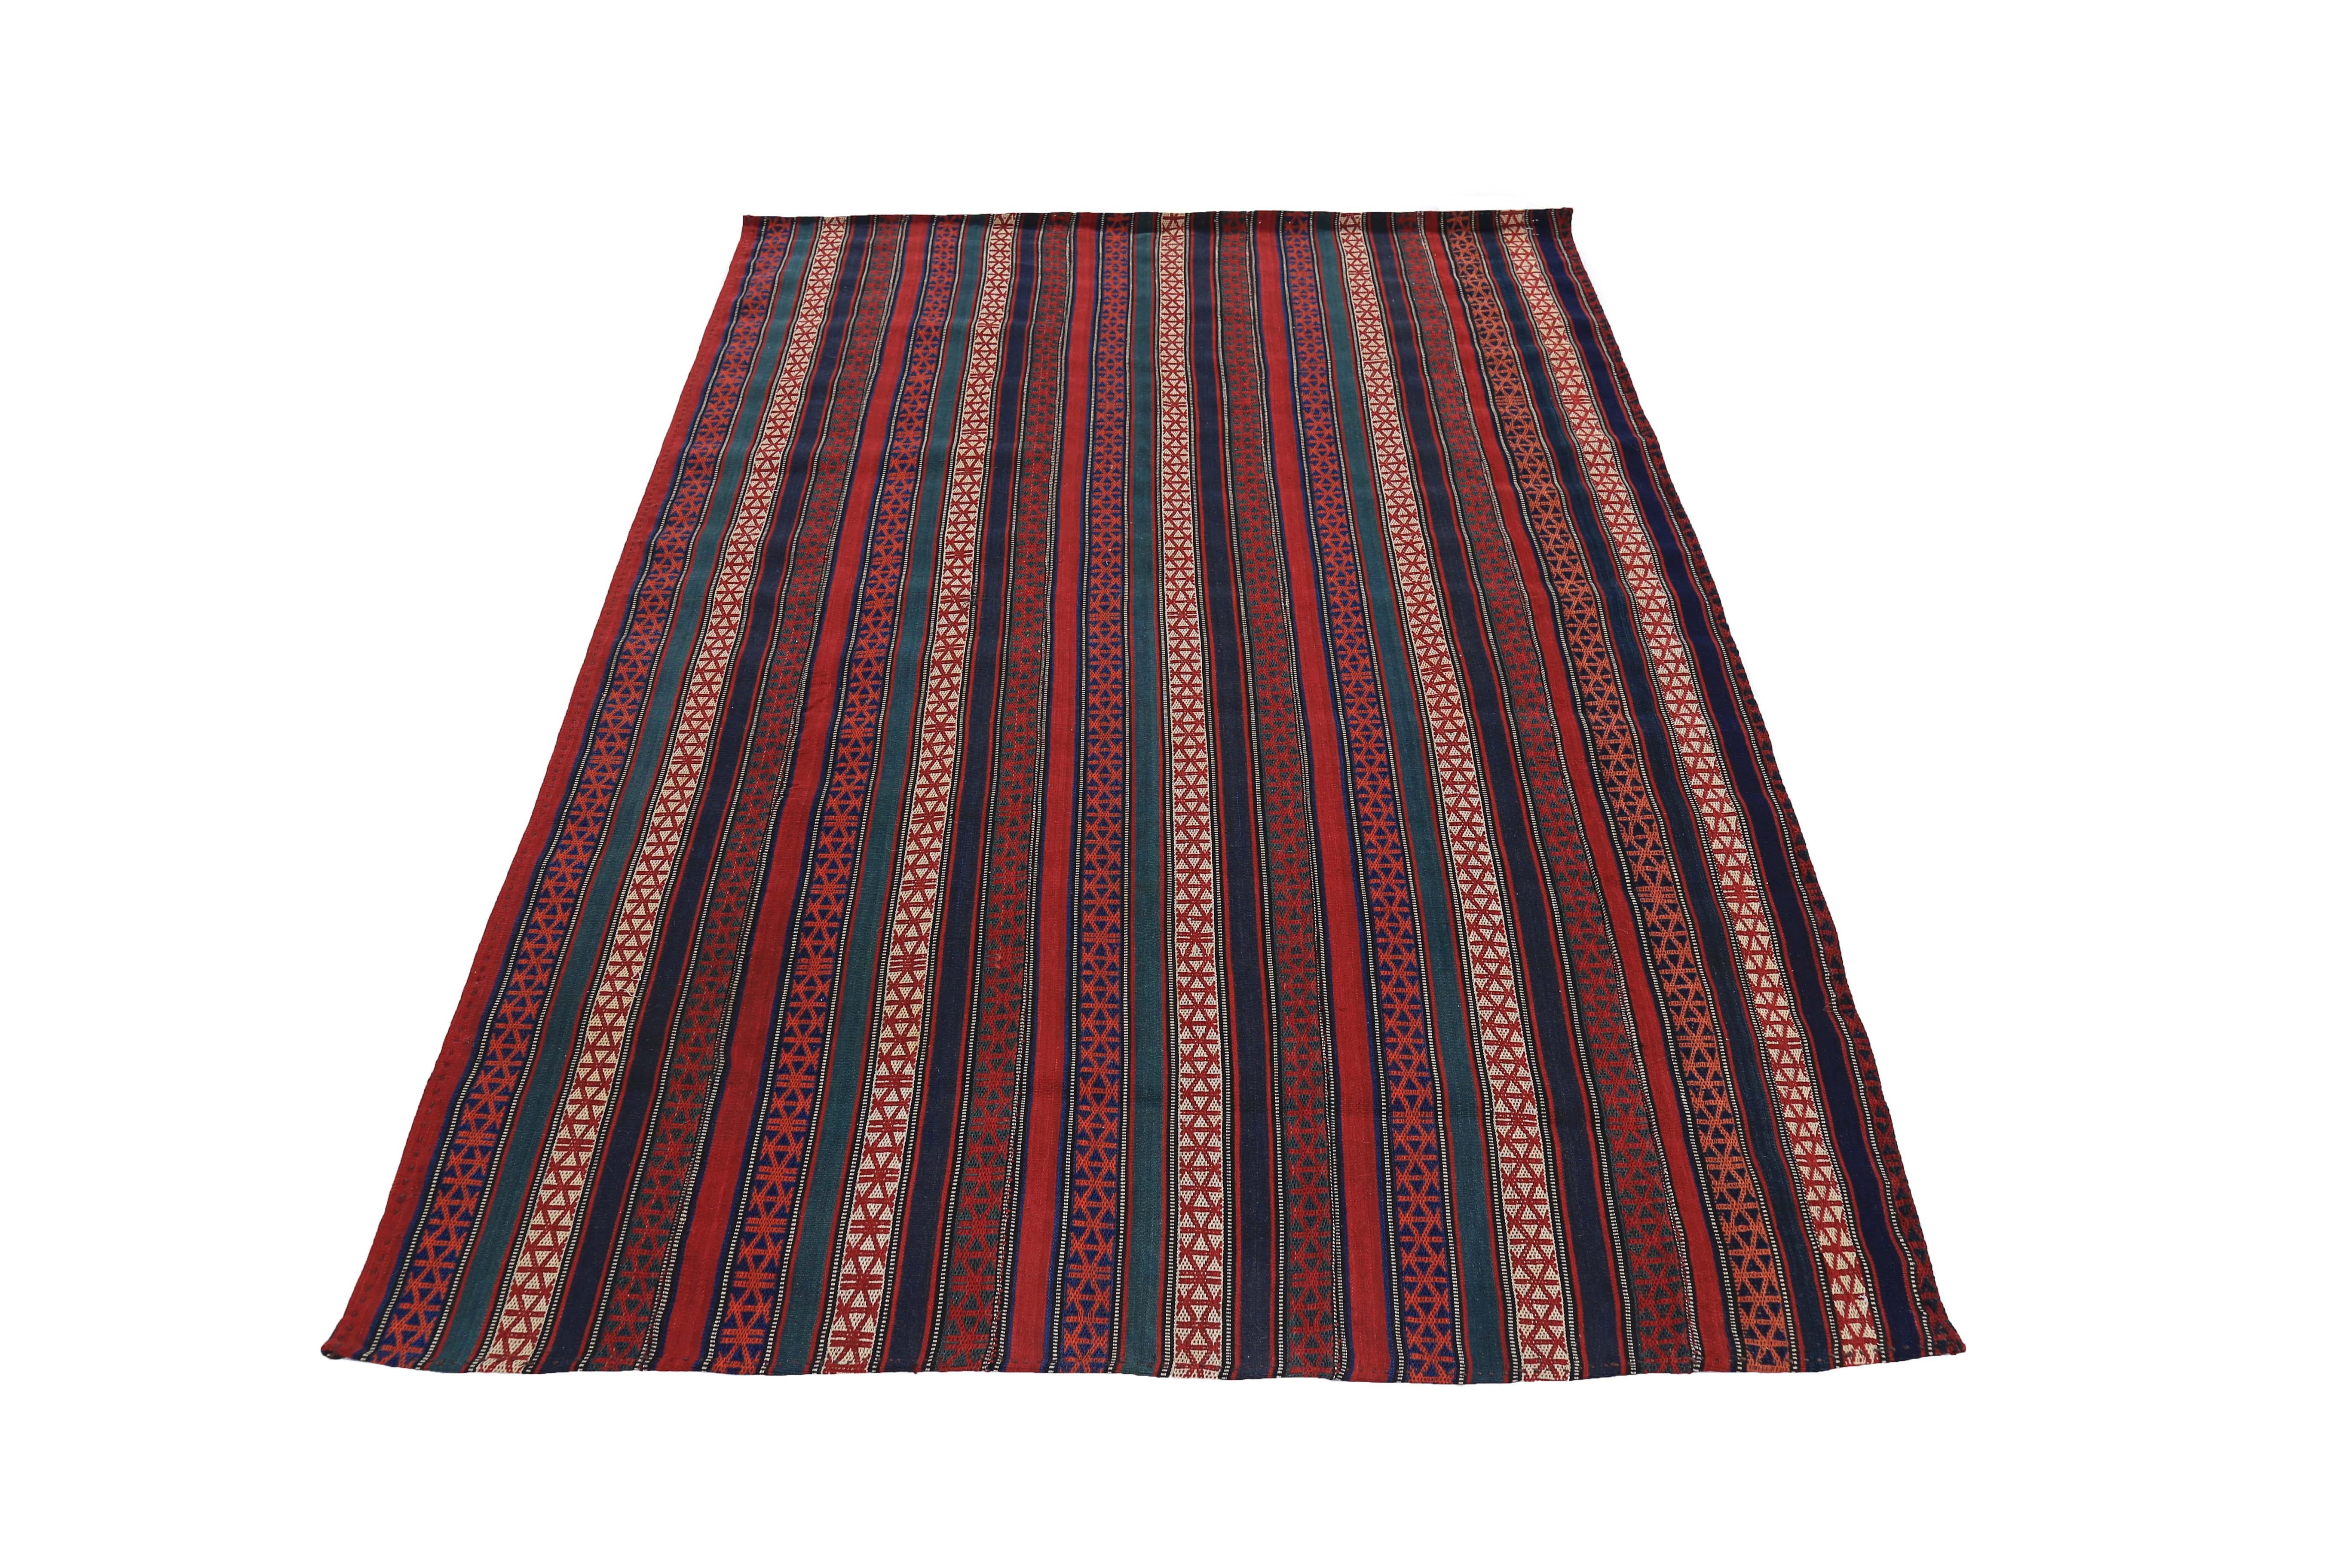 Turkish rug handwoven from the finest sheep’s wool and colored with all-natural vegetable dyes that are safe for humans and pets. It’s a traditional Kilim flat-weave design featuring red, beige and blue stripes with tribal design patterns. It’s a